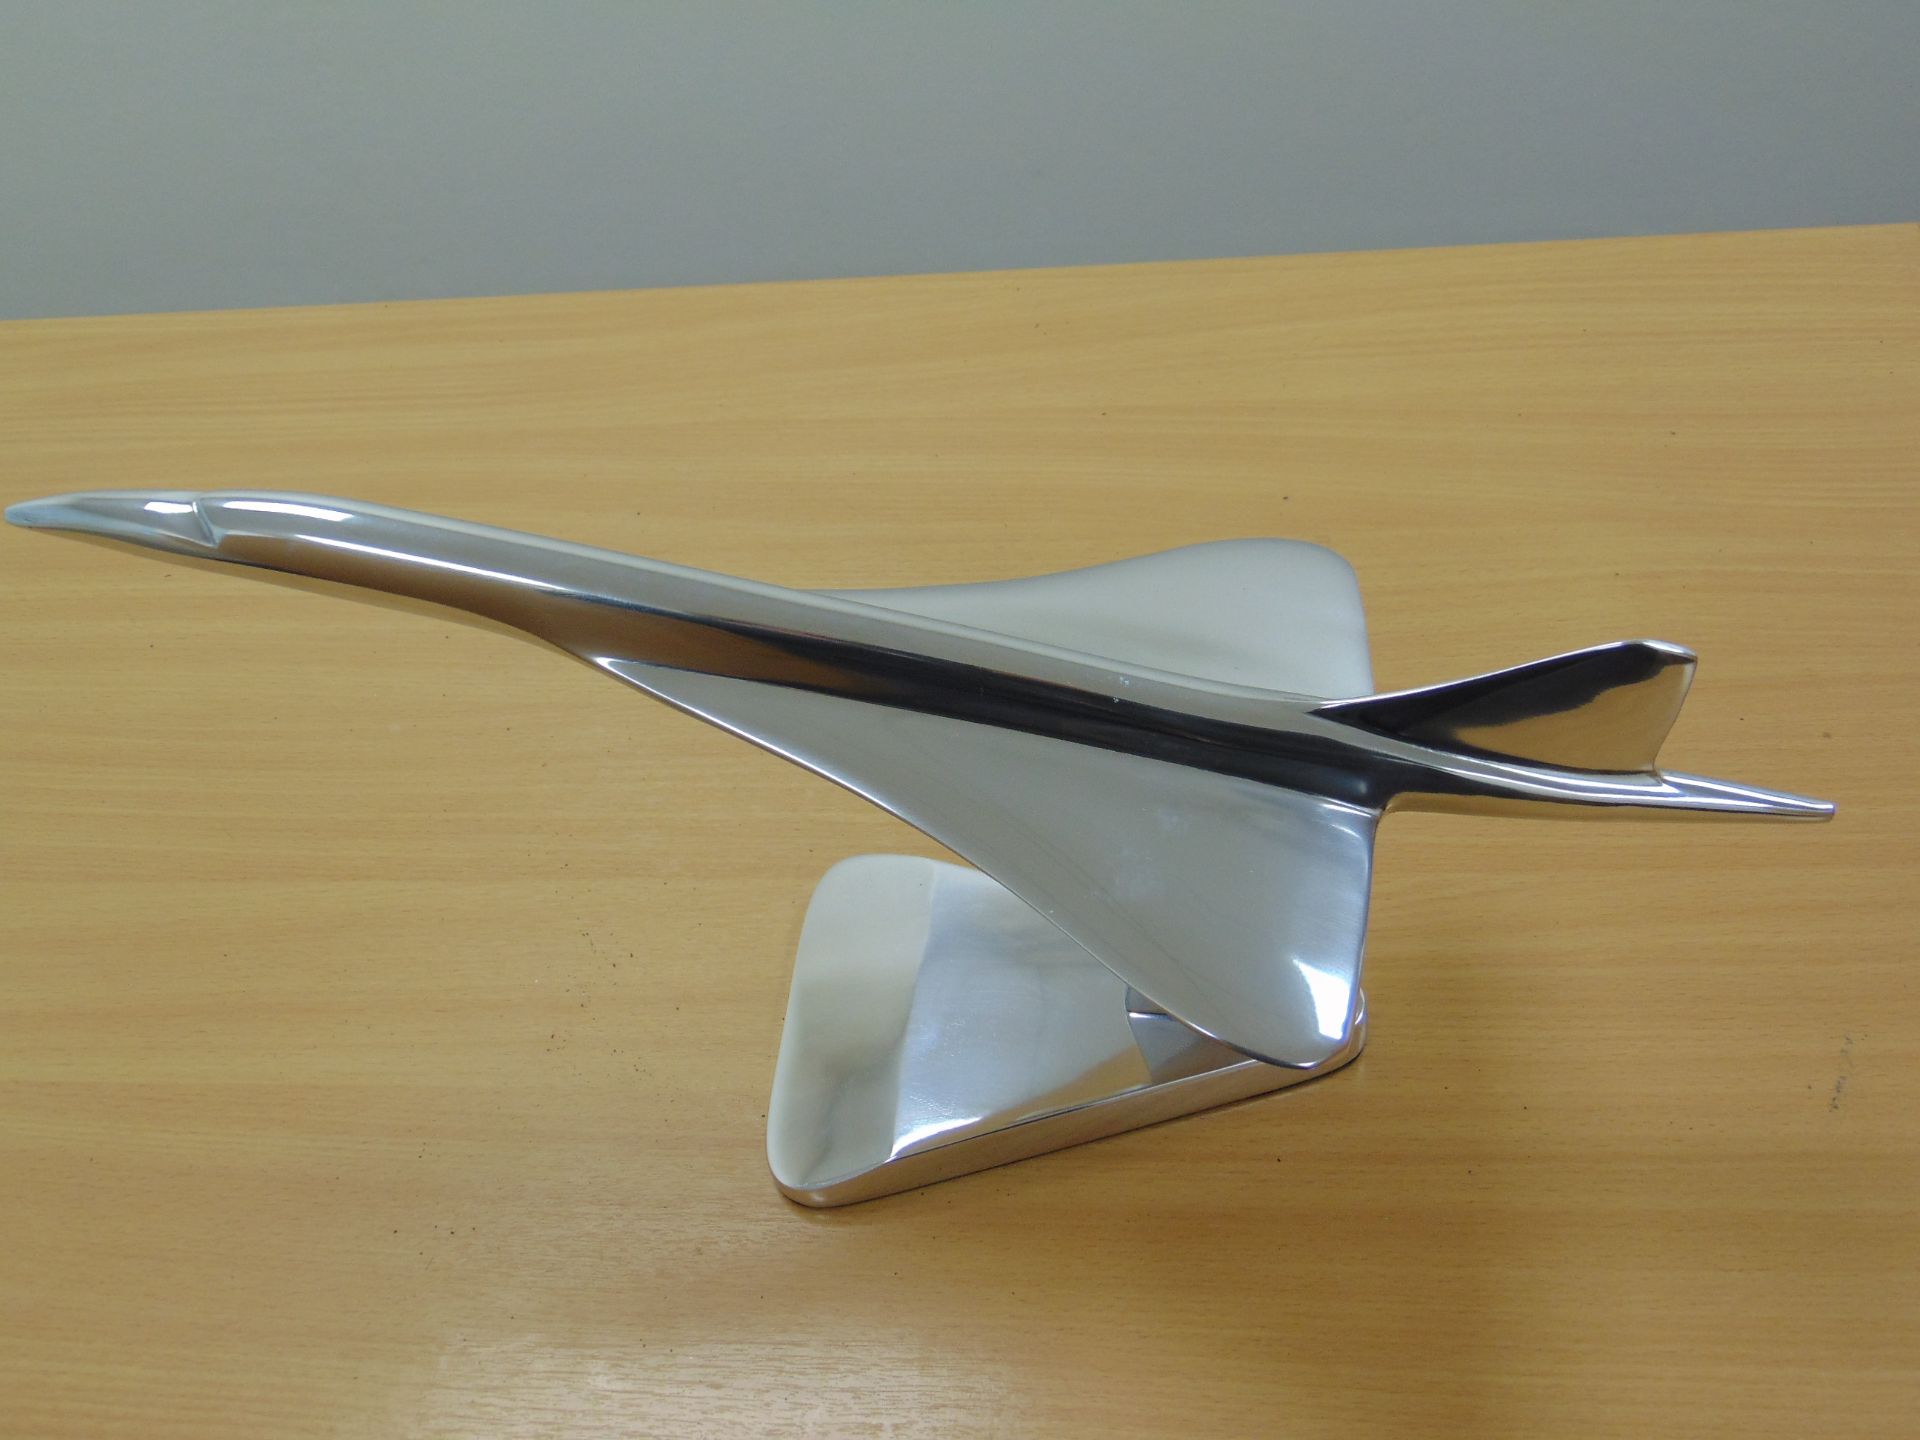 STUNNING POLISHED ALLUMINUM DESK TOP MODEL OF A CONCORD IN FLIGHT ON STAND - Image 3 of 12